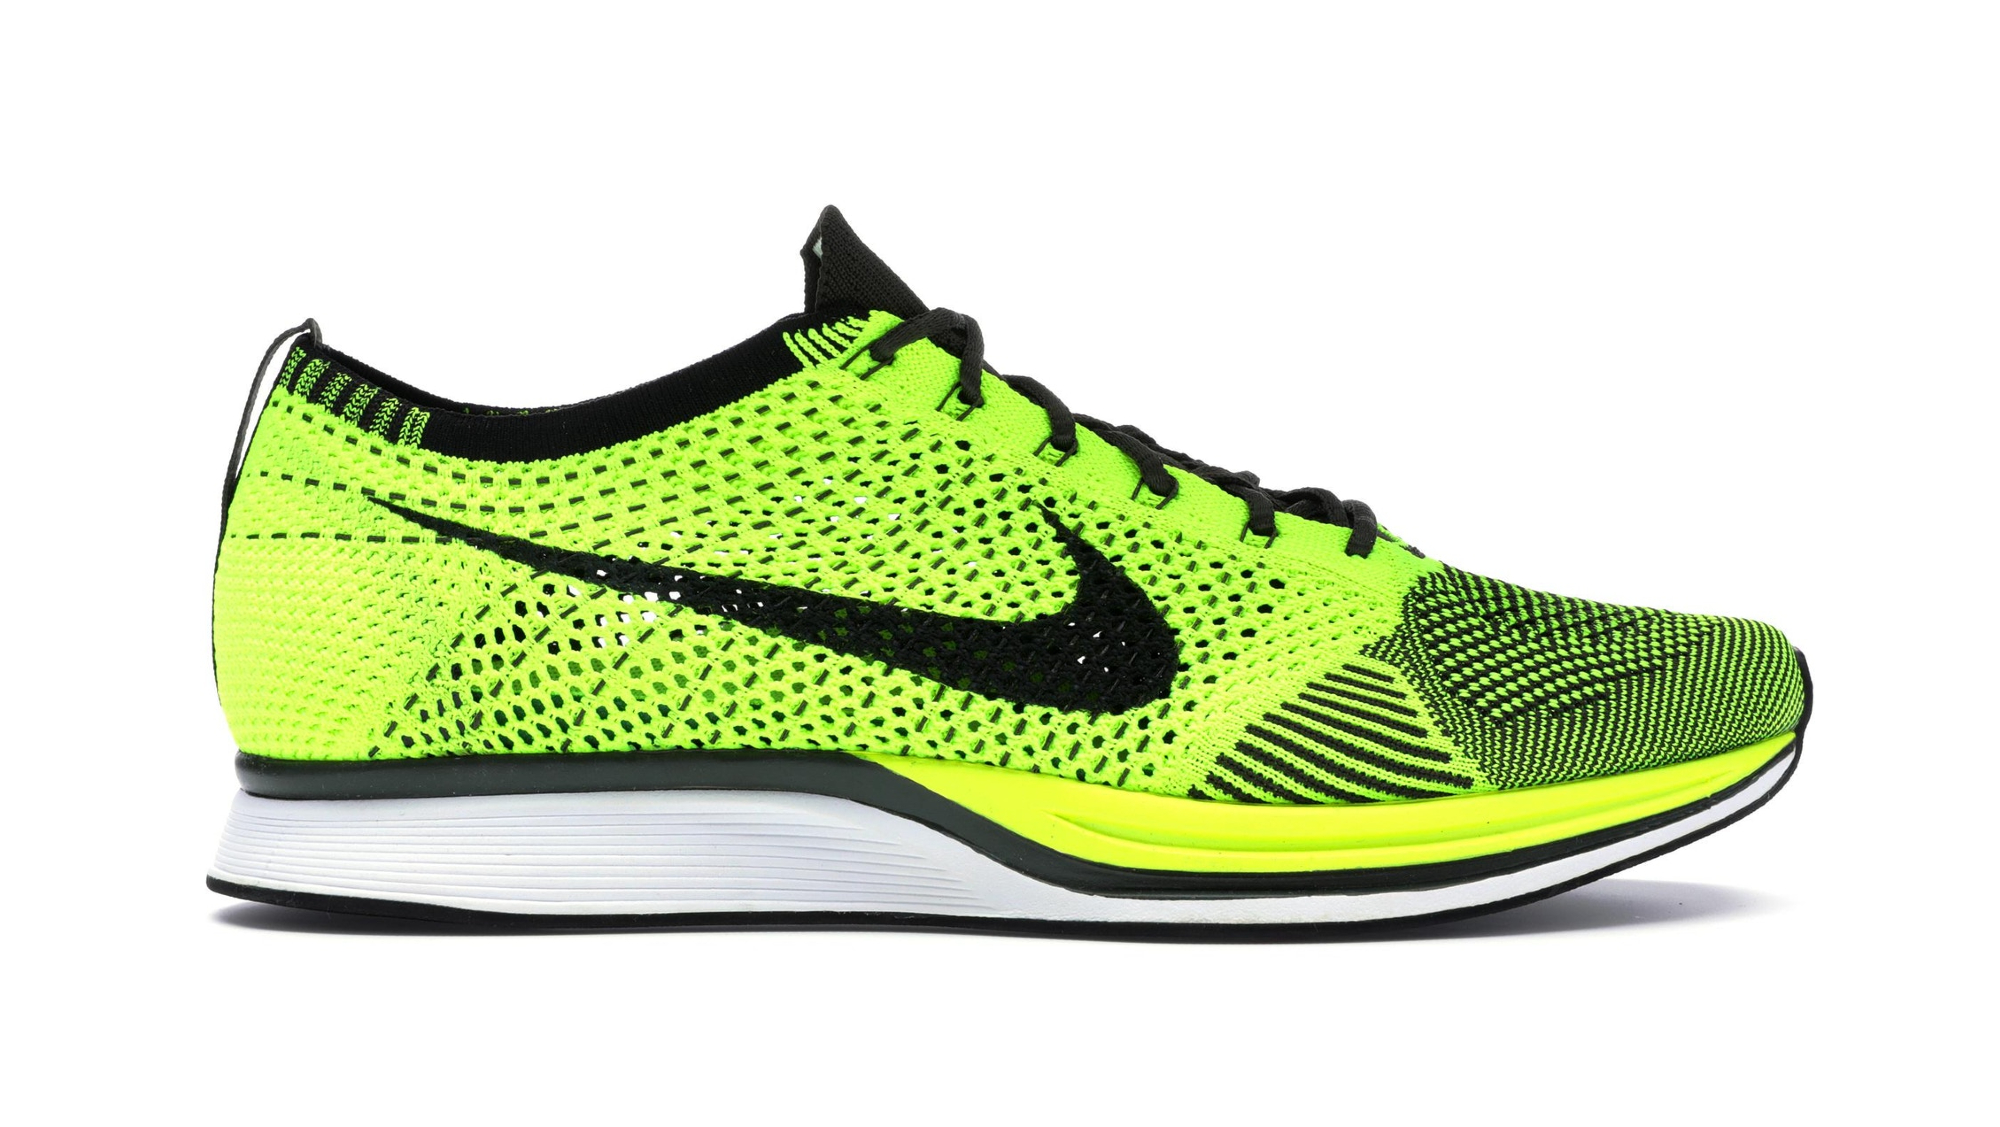 Nike Flyknit Racer "Volt" | | Release Dates, Calendar, Prices Collaborations